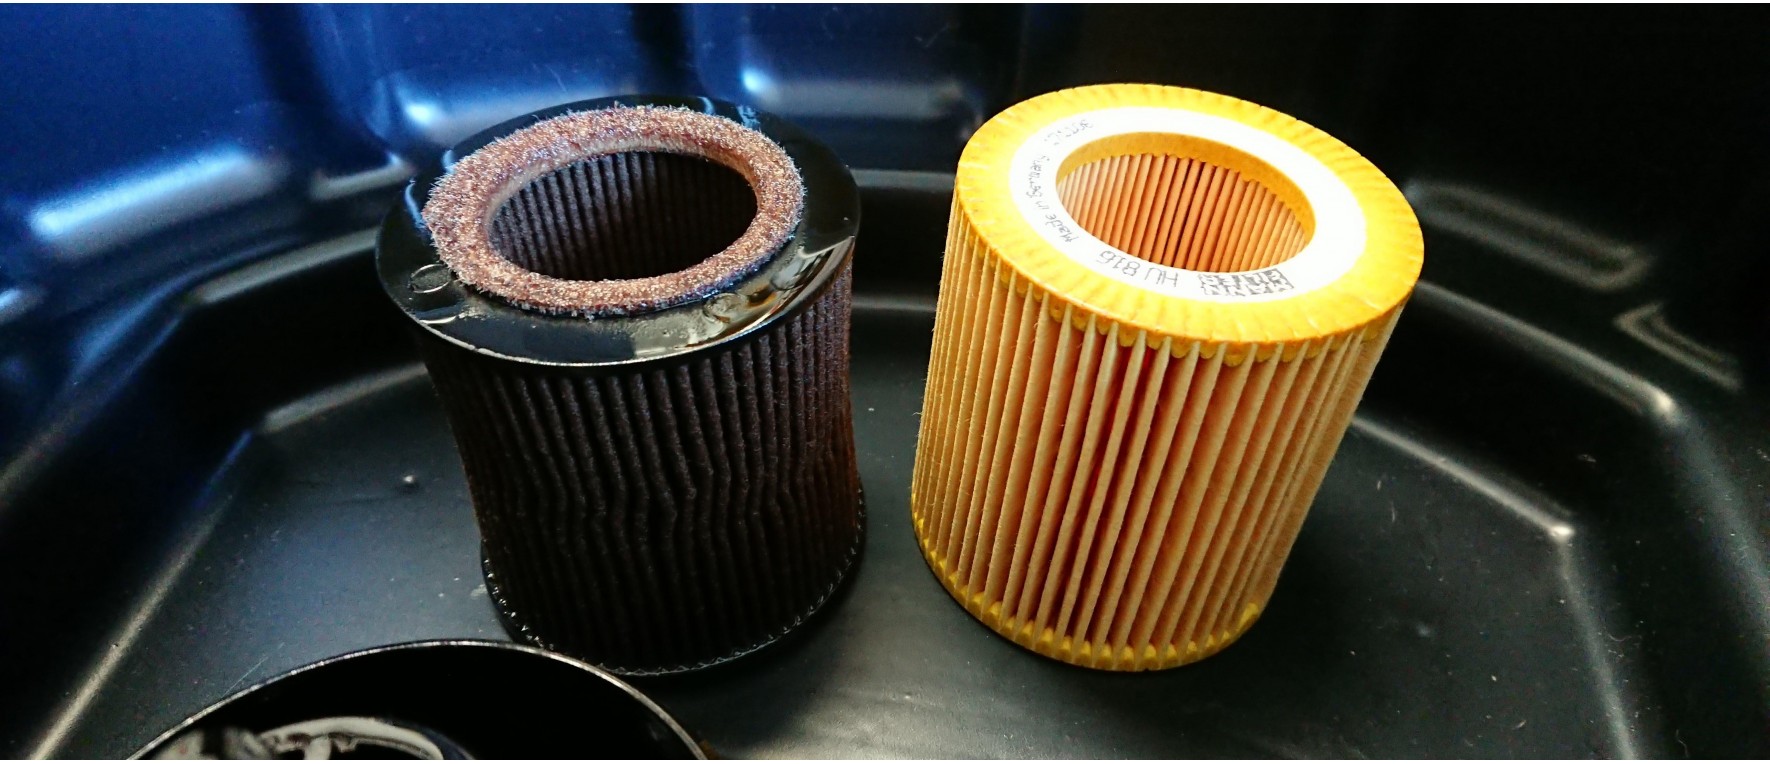 How to pick the right filter. How to spot when the oil filter is contaminated